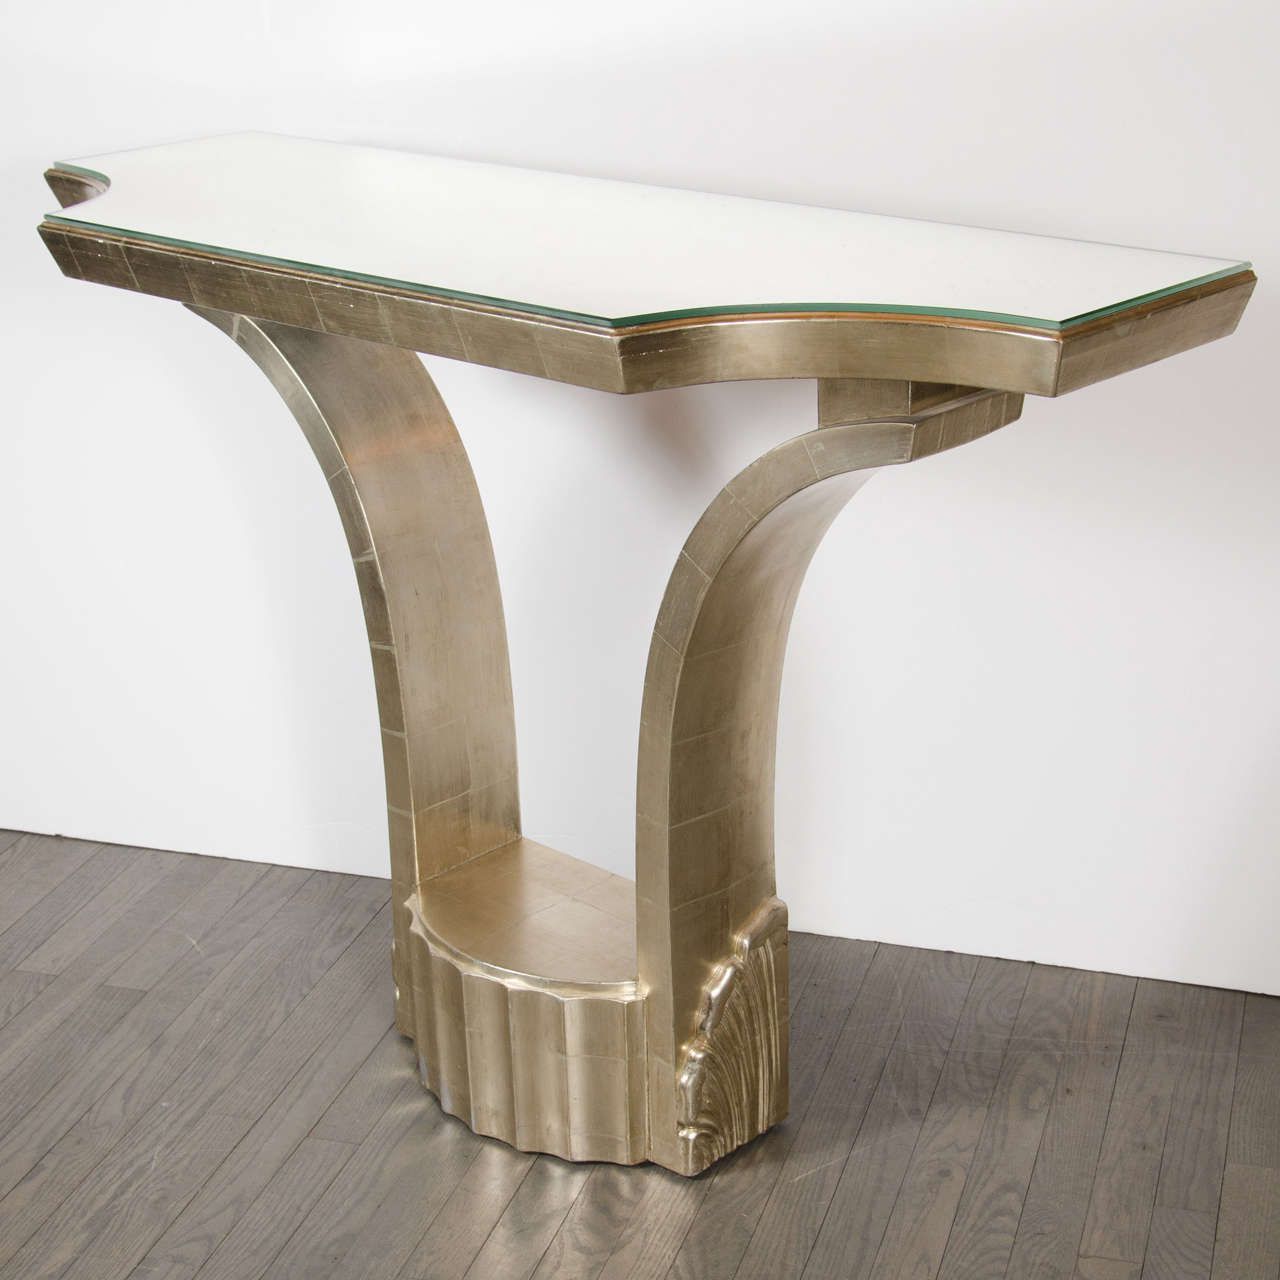 Trendy Hollywood Regency Console With White Gold Leafing And Pertaining To Gold And Mirror Modern Cube Console Tables (View 7 of 10)